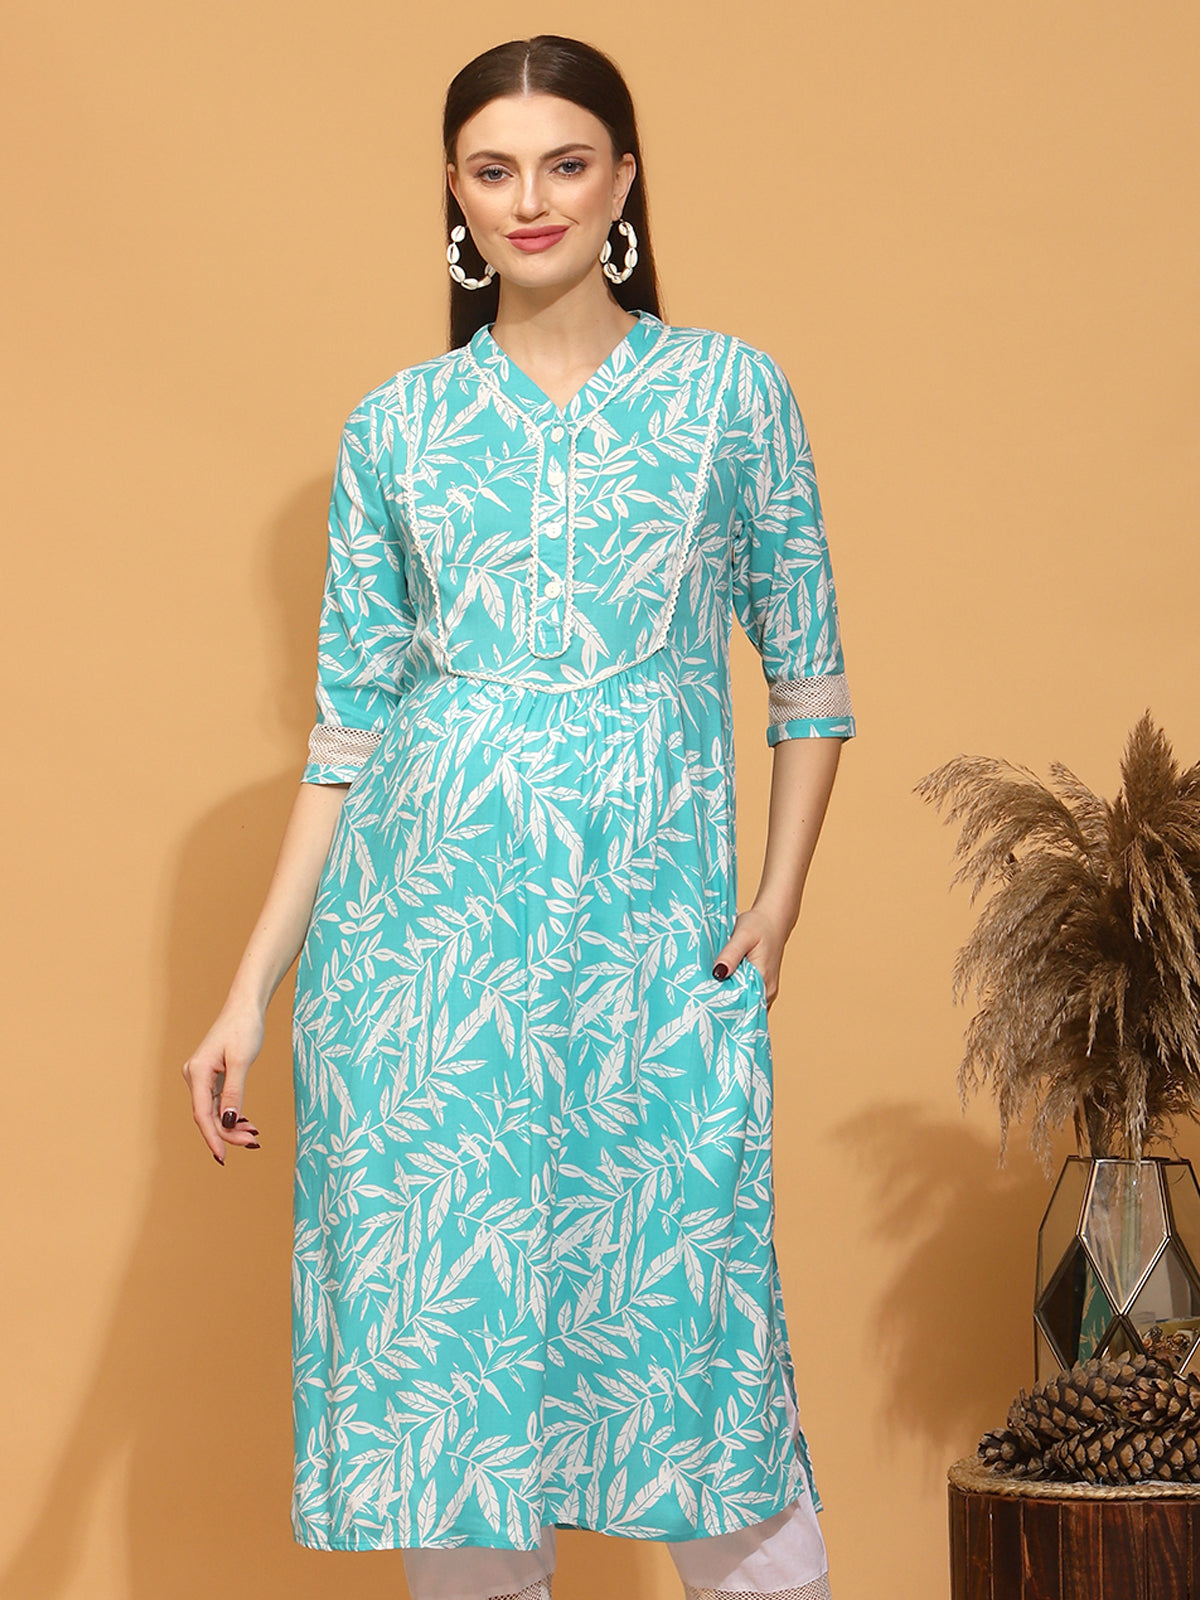 Maternity Kurtis – Flaunt Your Bump with Style and Comfort